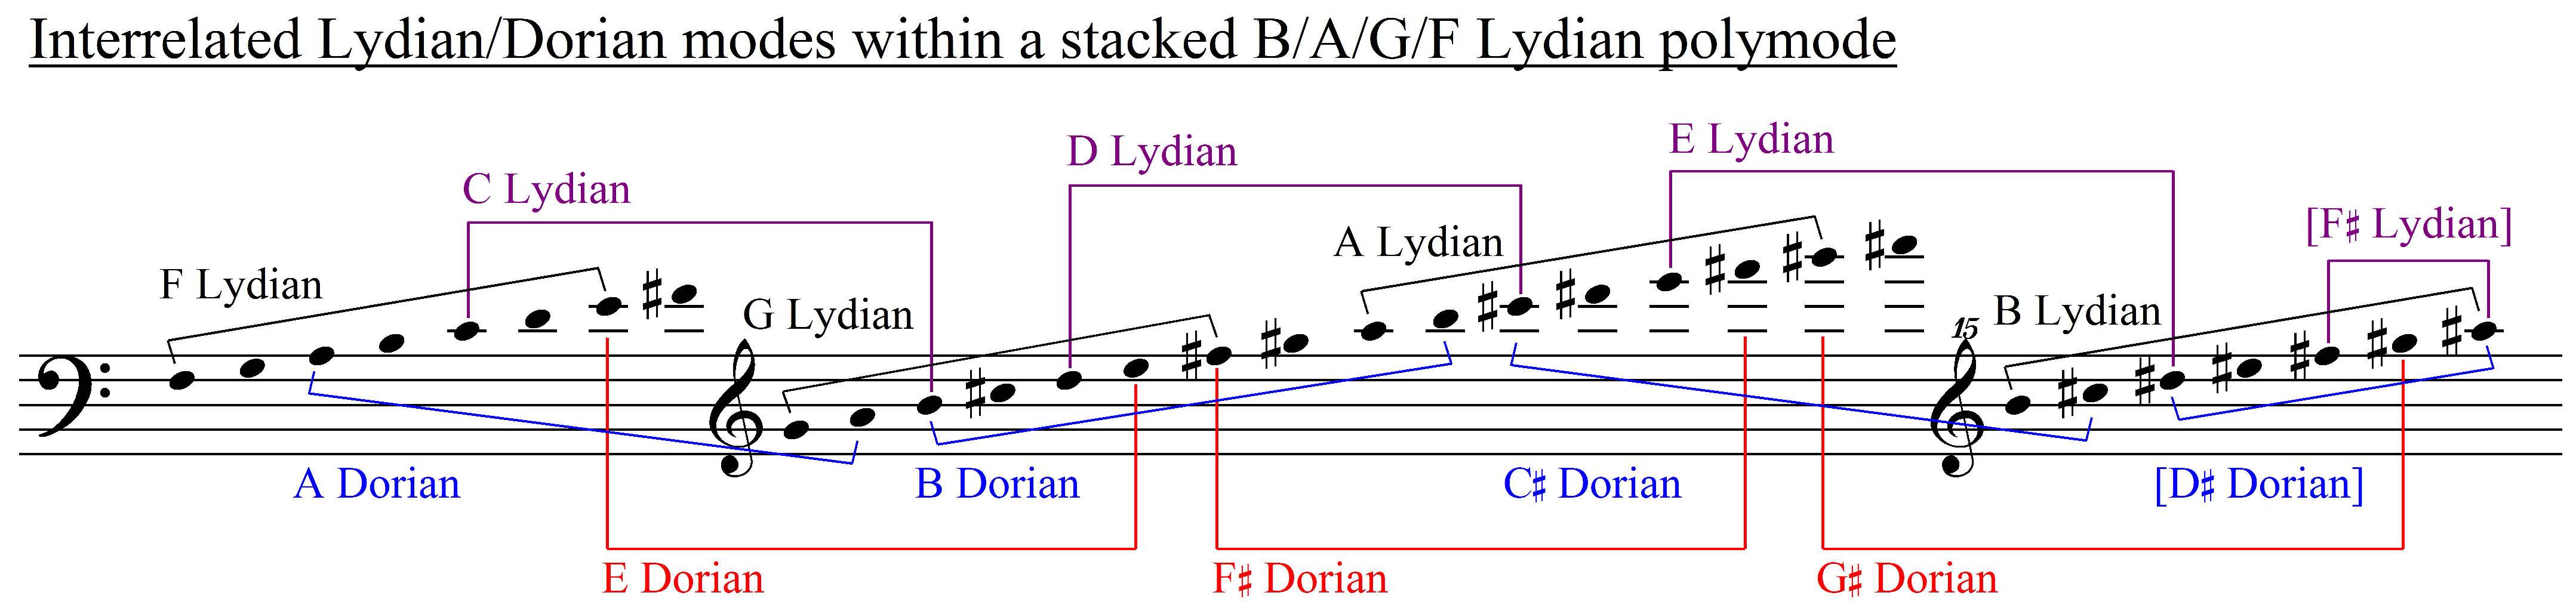 Fig 1.2.4